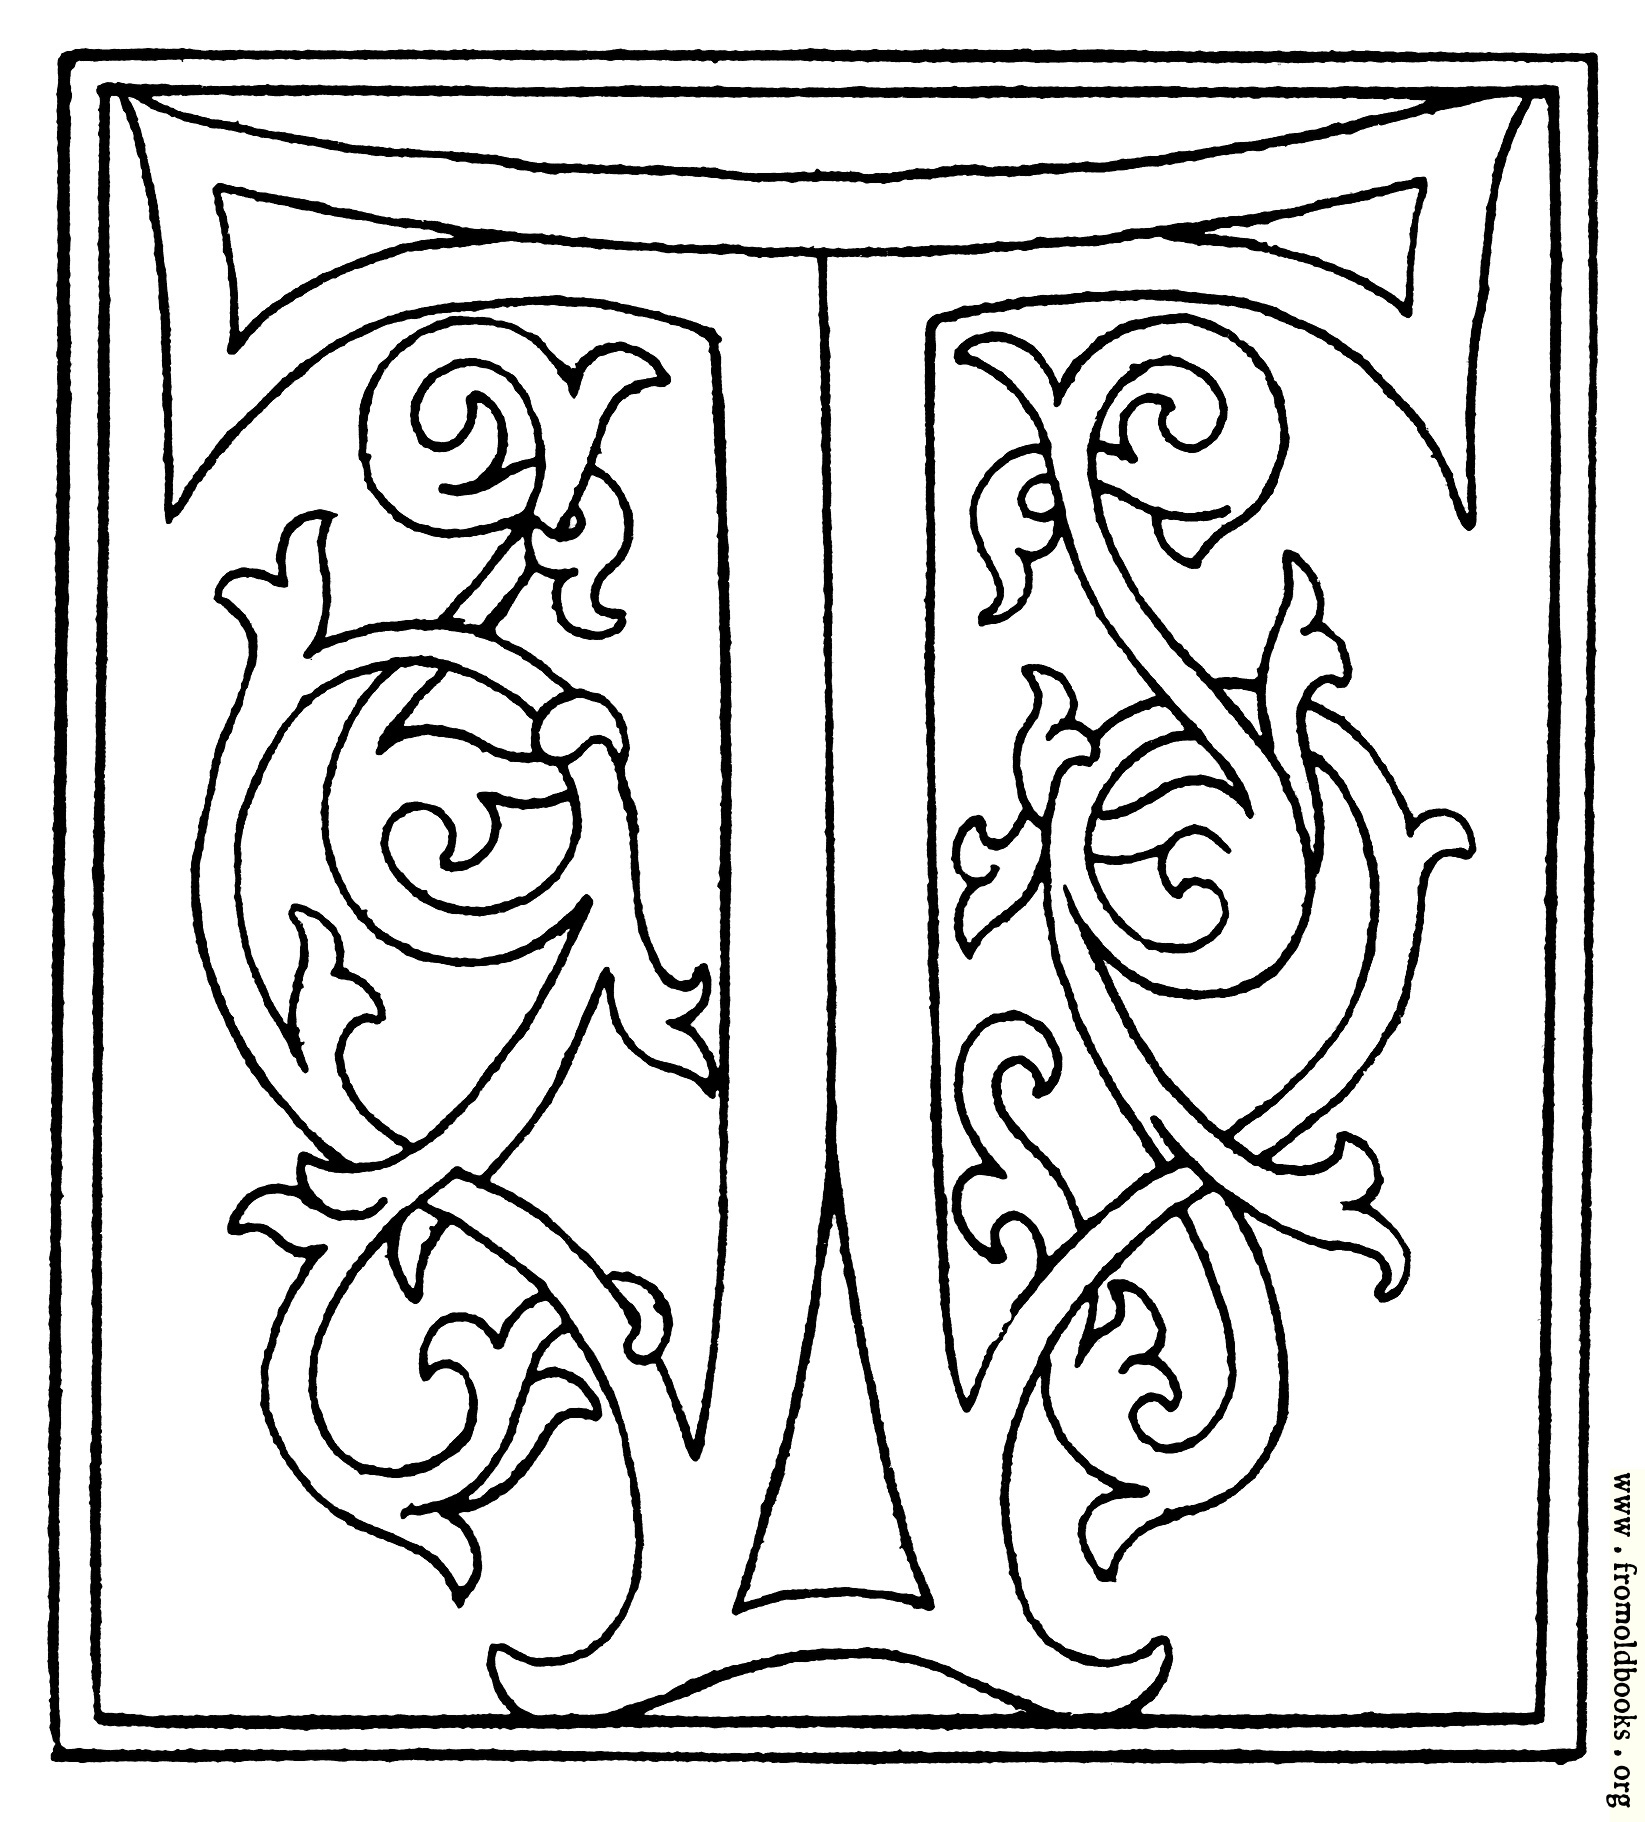 Friendly coloring page slavic initial letter